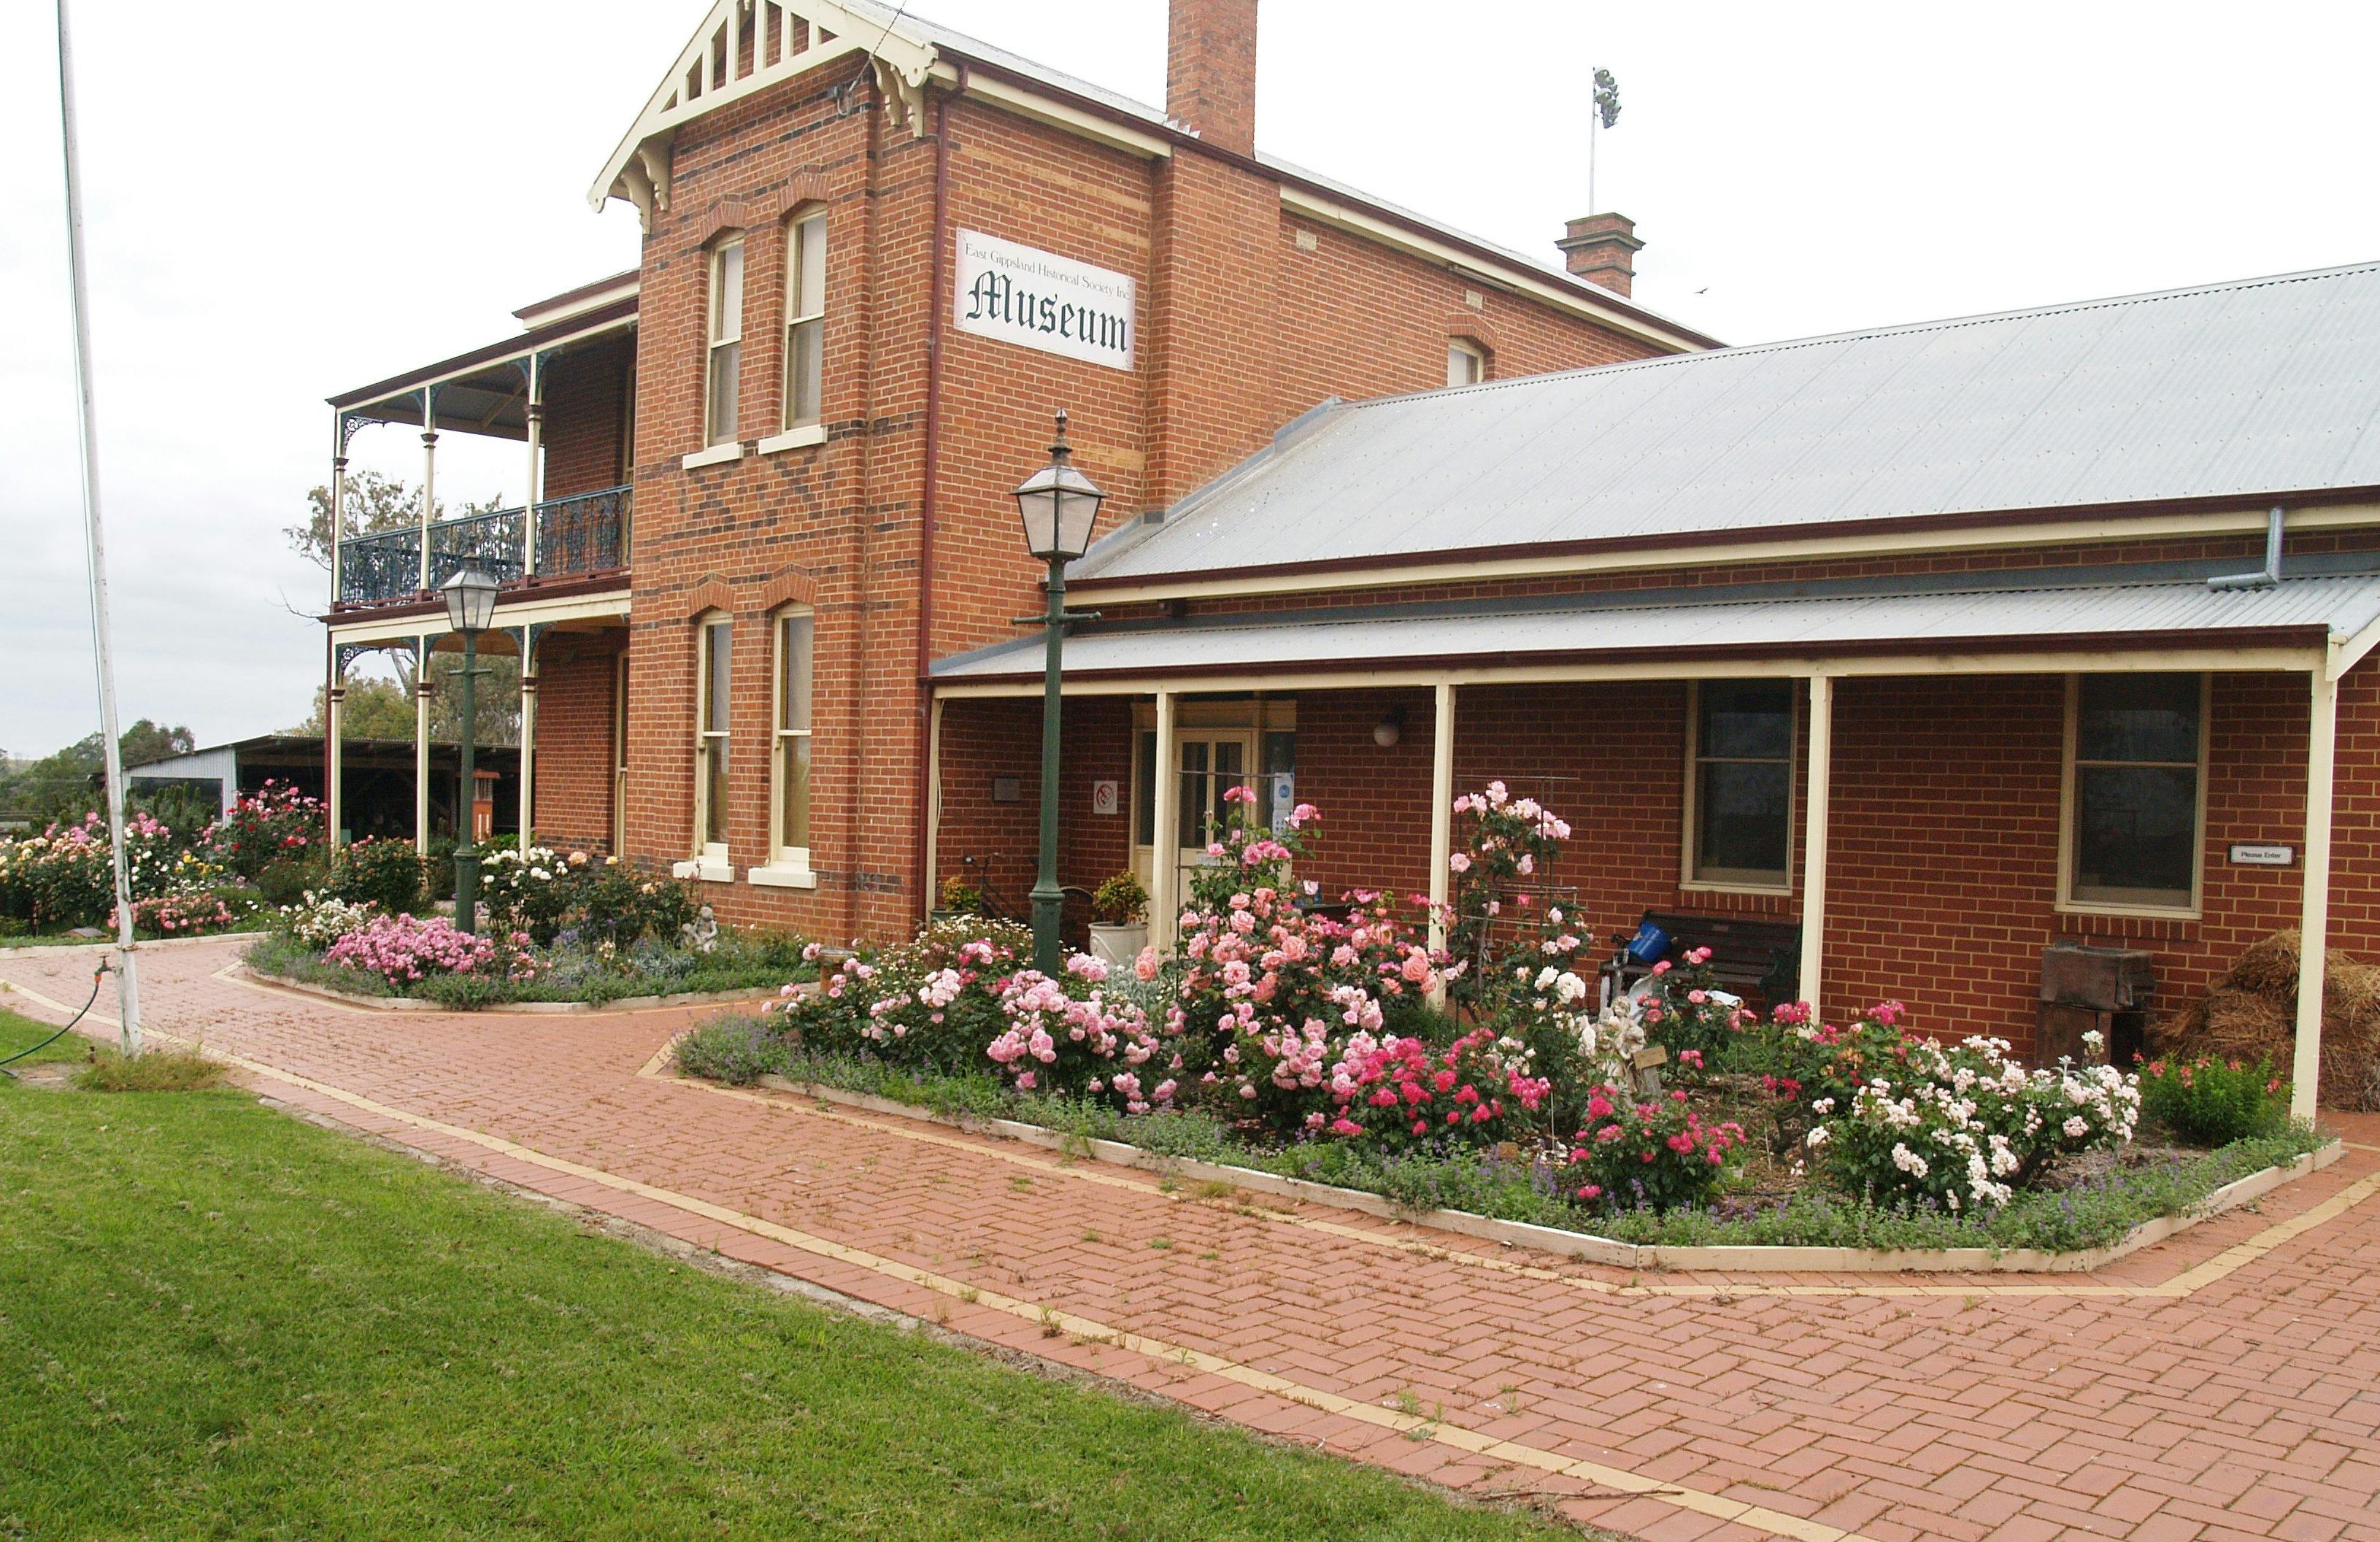 The museum with Australian bred rose gardens in front and  2 converted old style gas lights